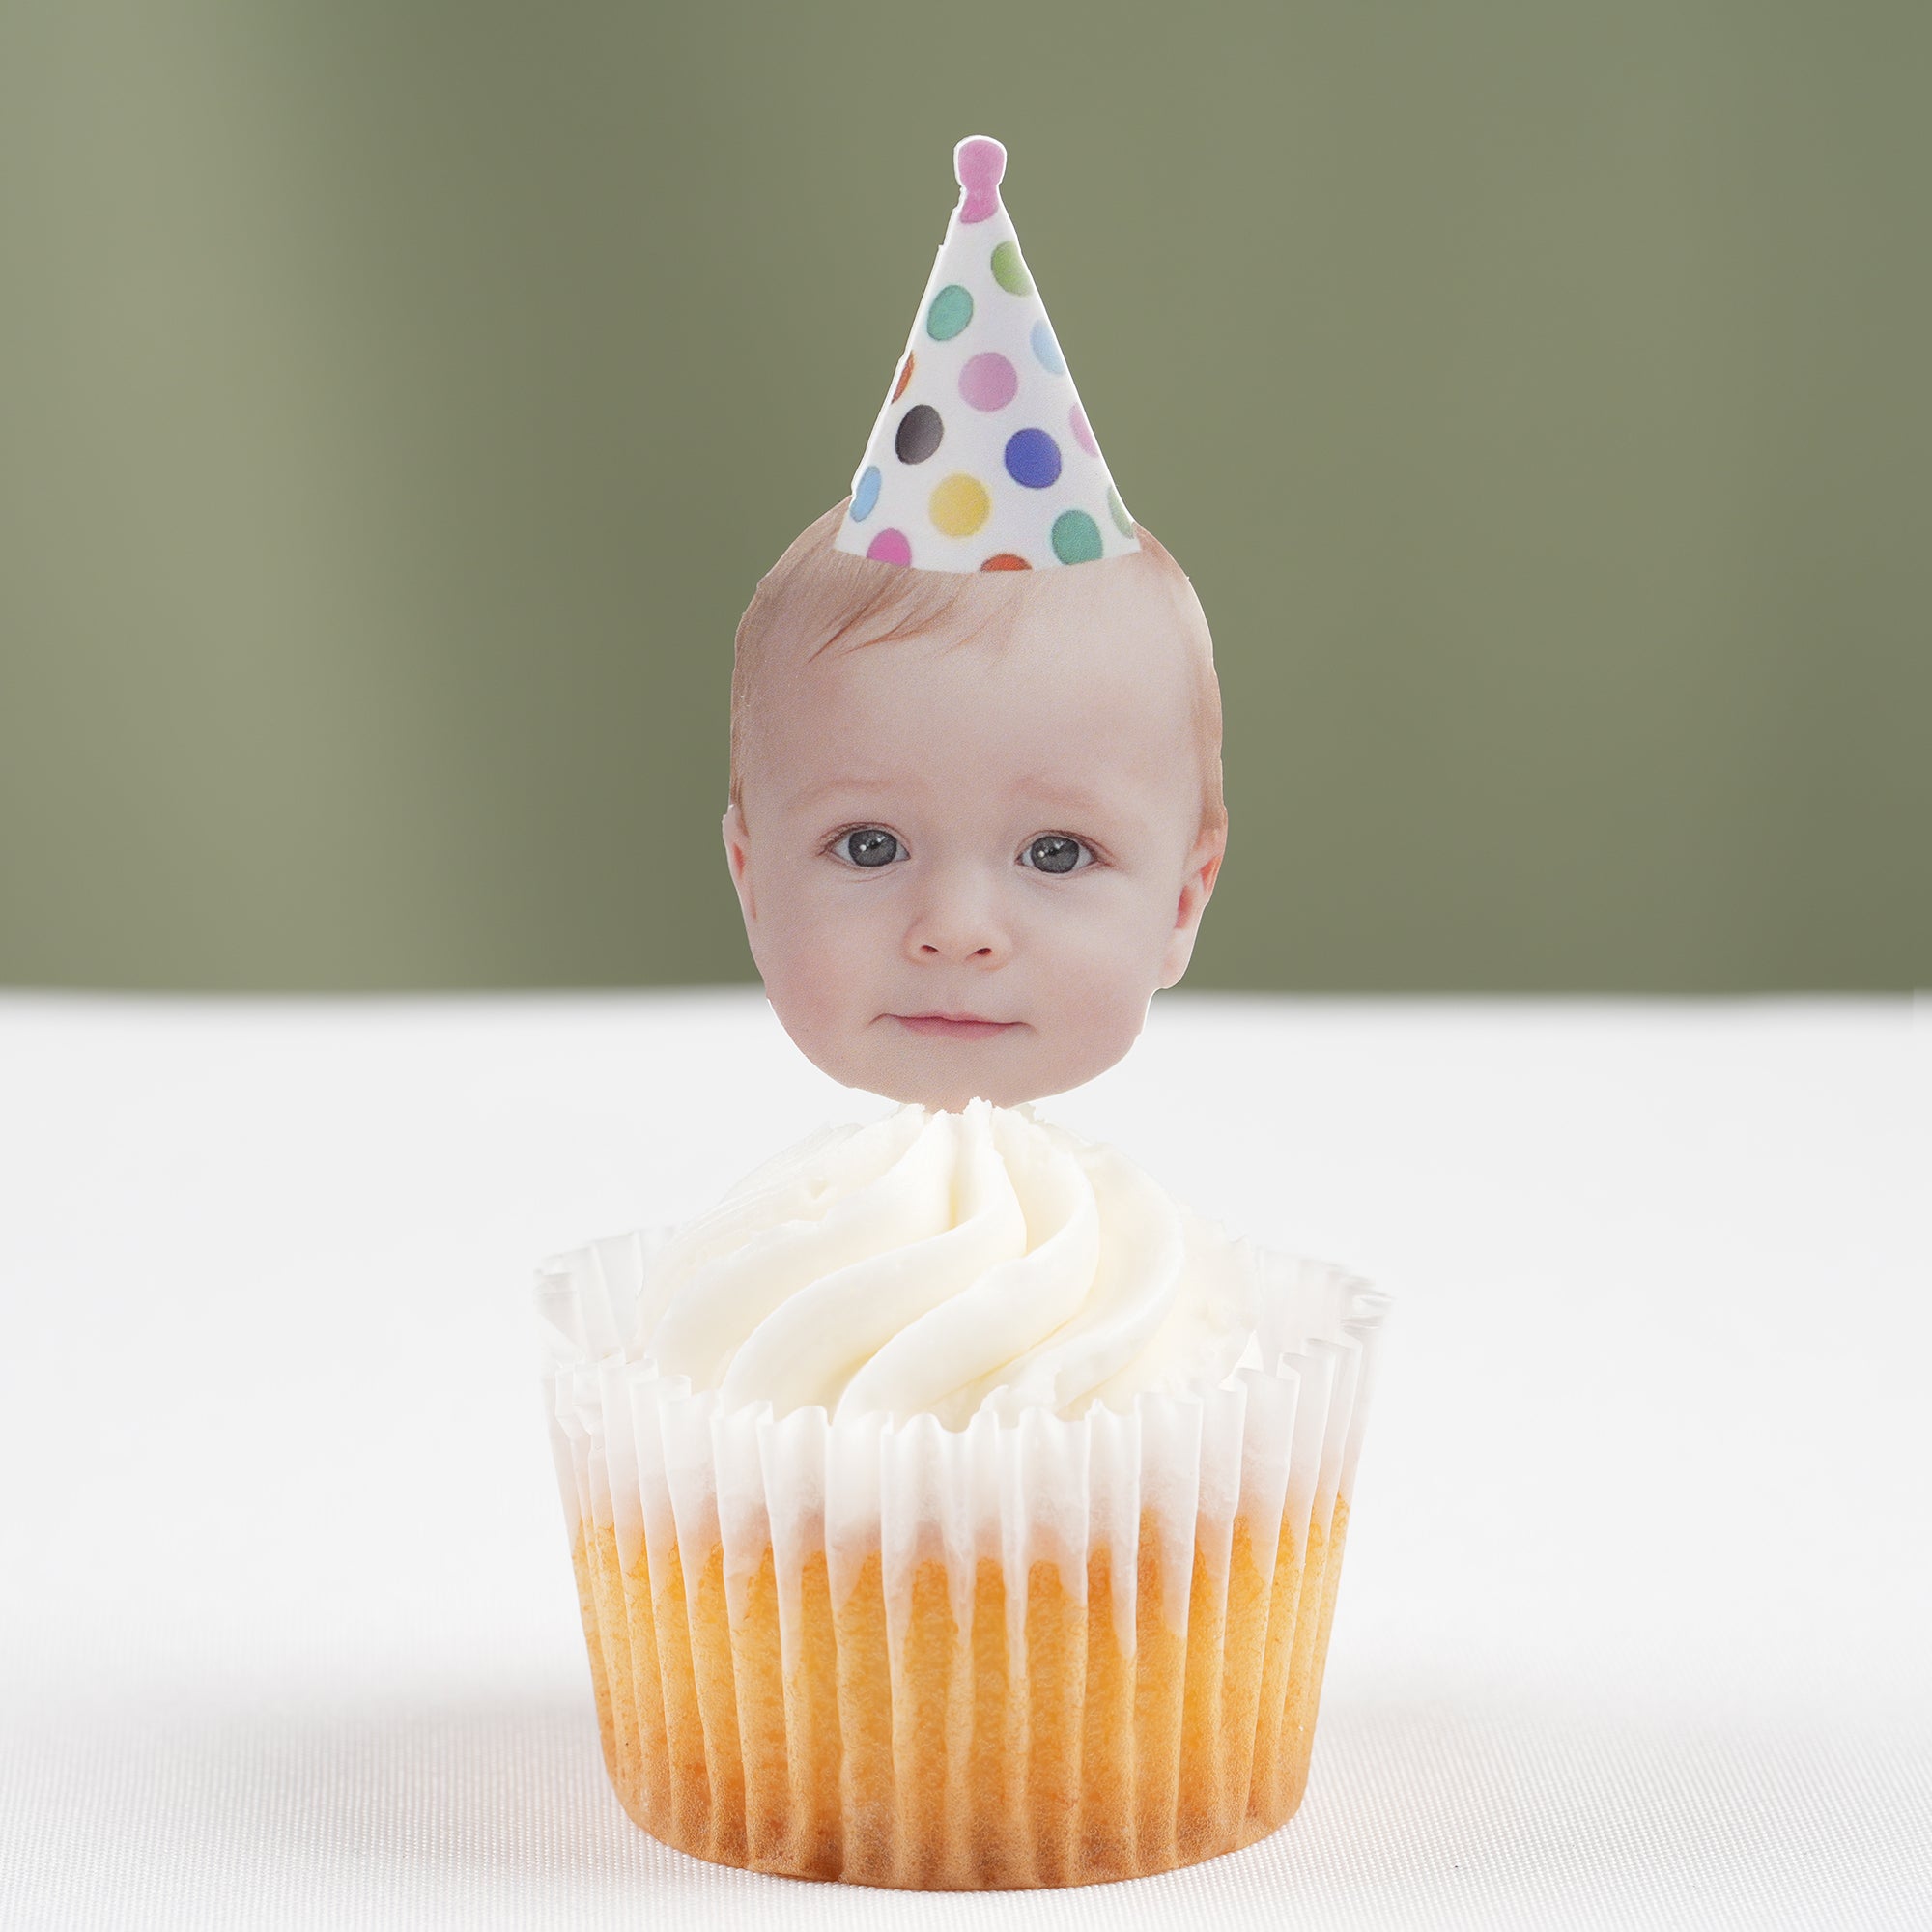 Acrylic Photo Printed Cupcake Topper Decoration - Cupcake Topper